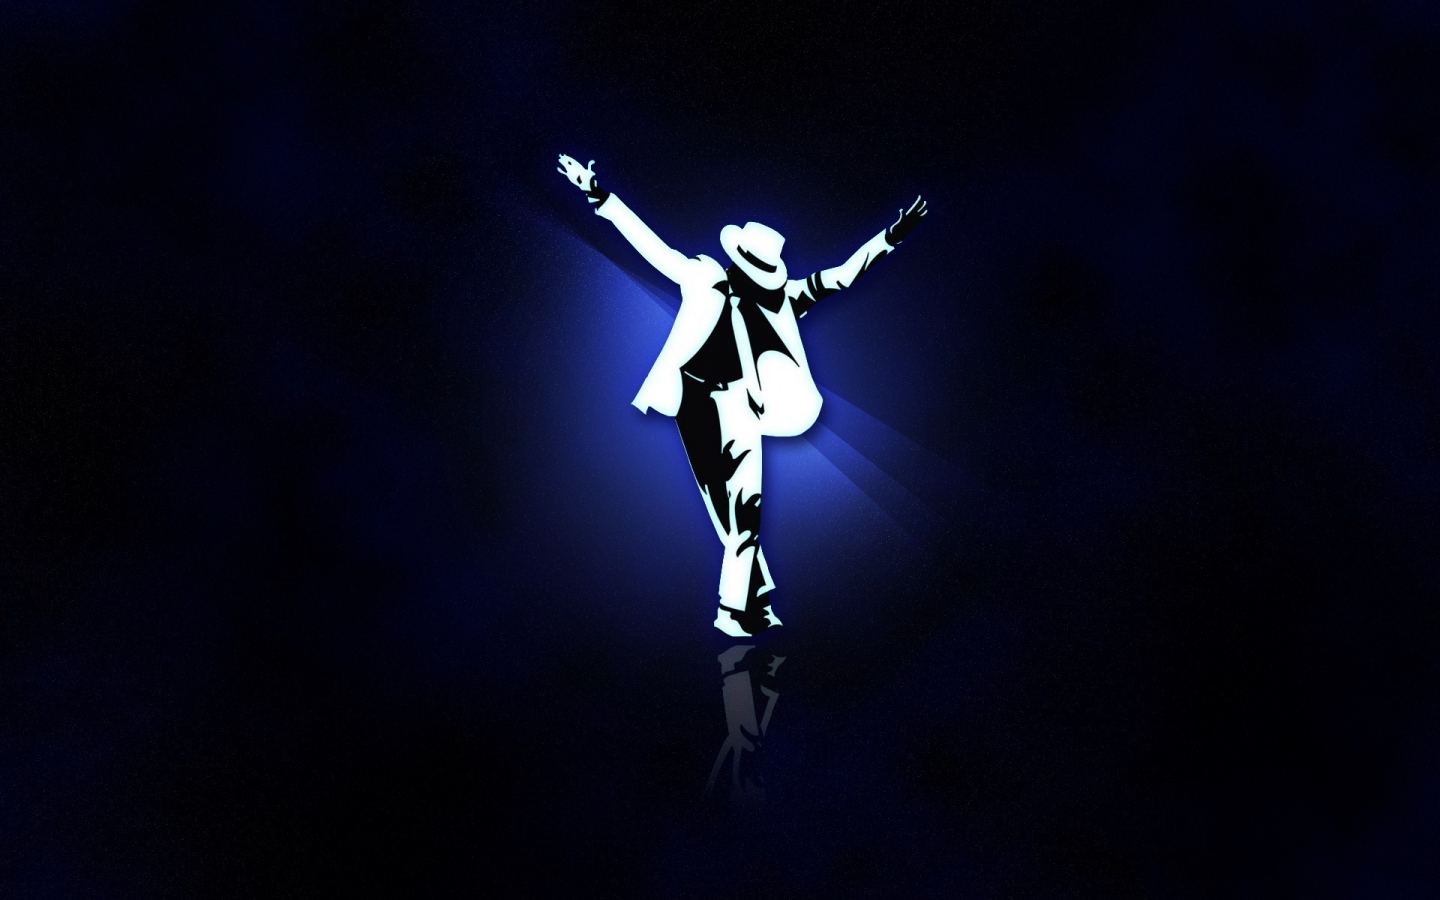 Michael Jackson Tribute for 1440 x 900 widescreen resolution